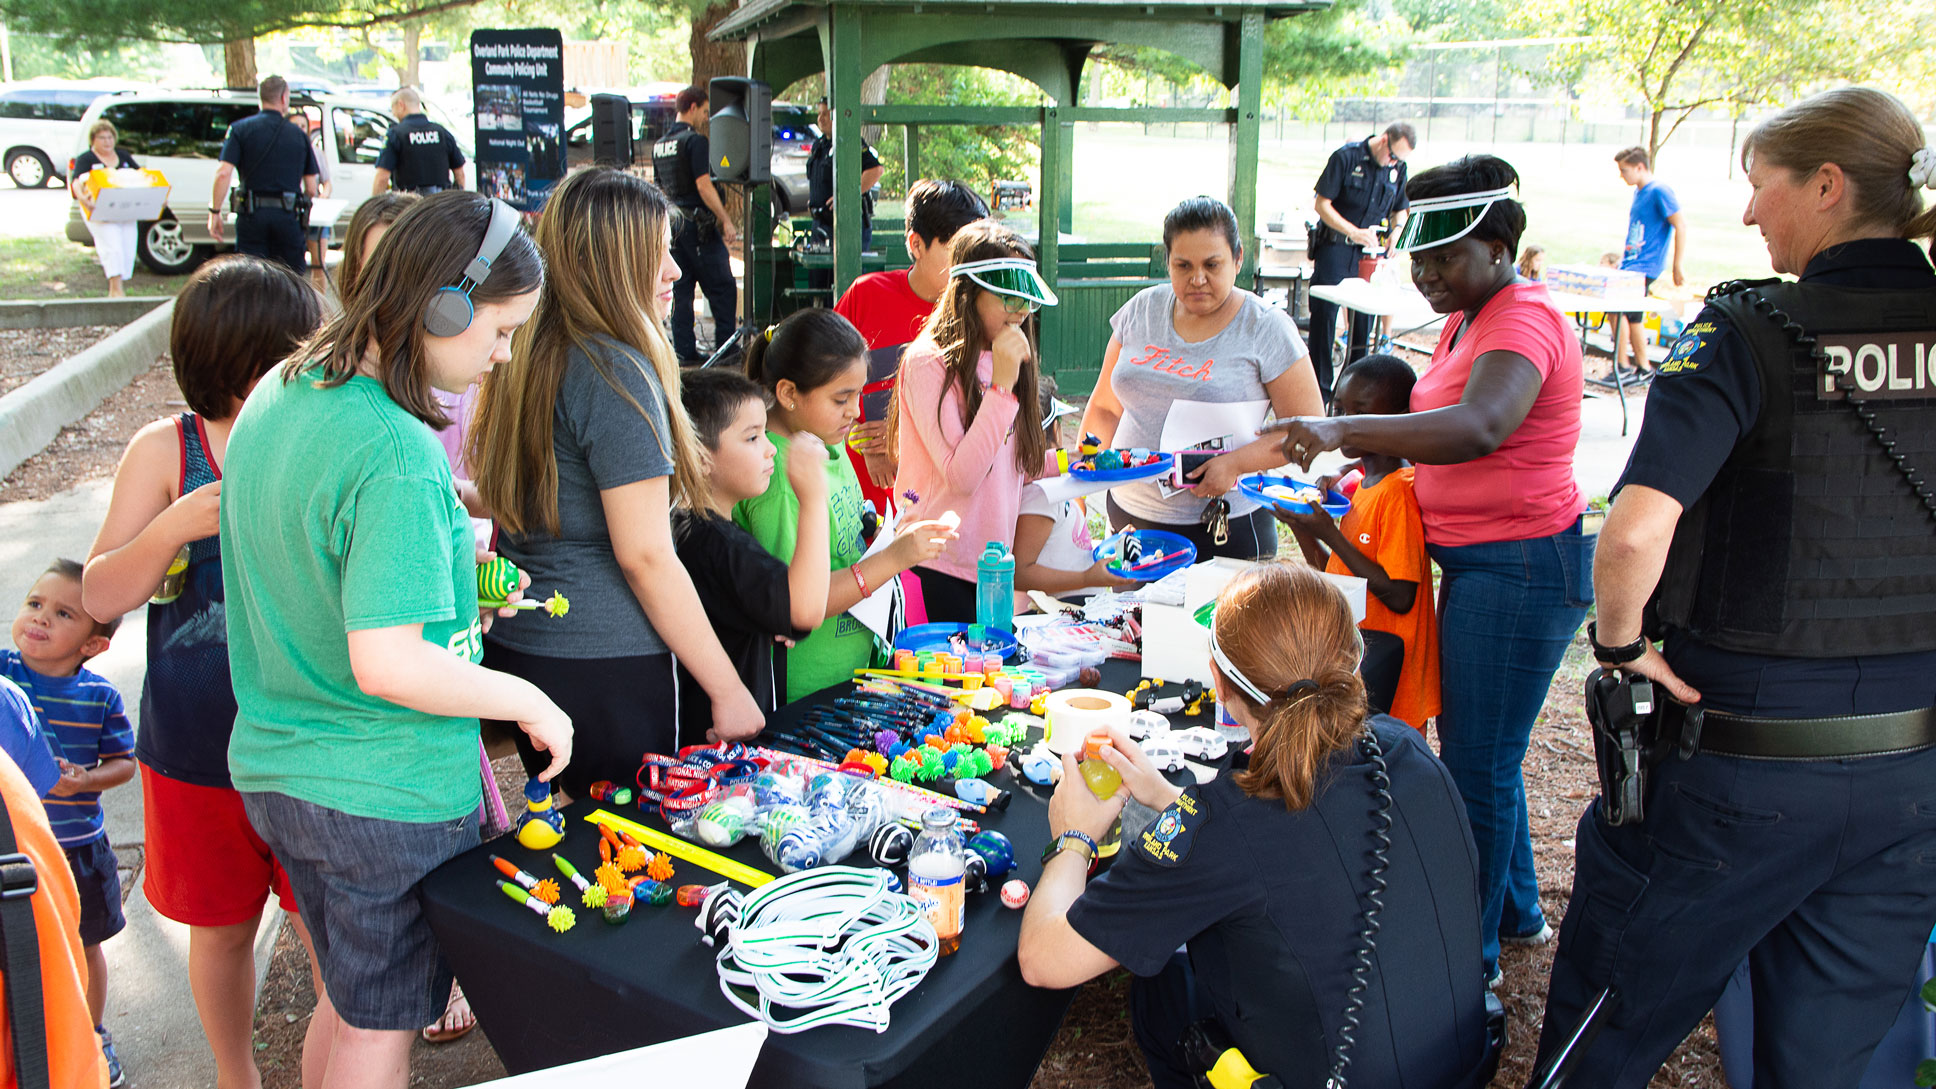 Group of children, adults, and police officers gathered around a table of toys and marketing merchandise at an event at an outdoor park